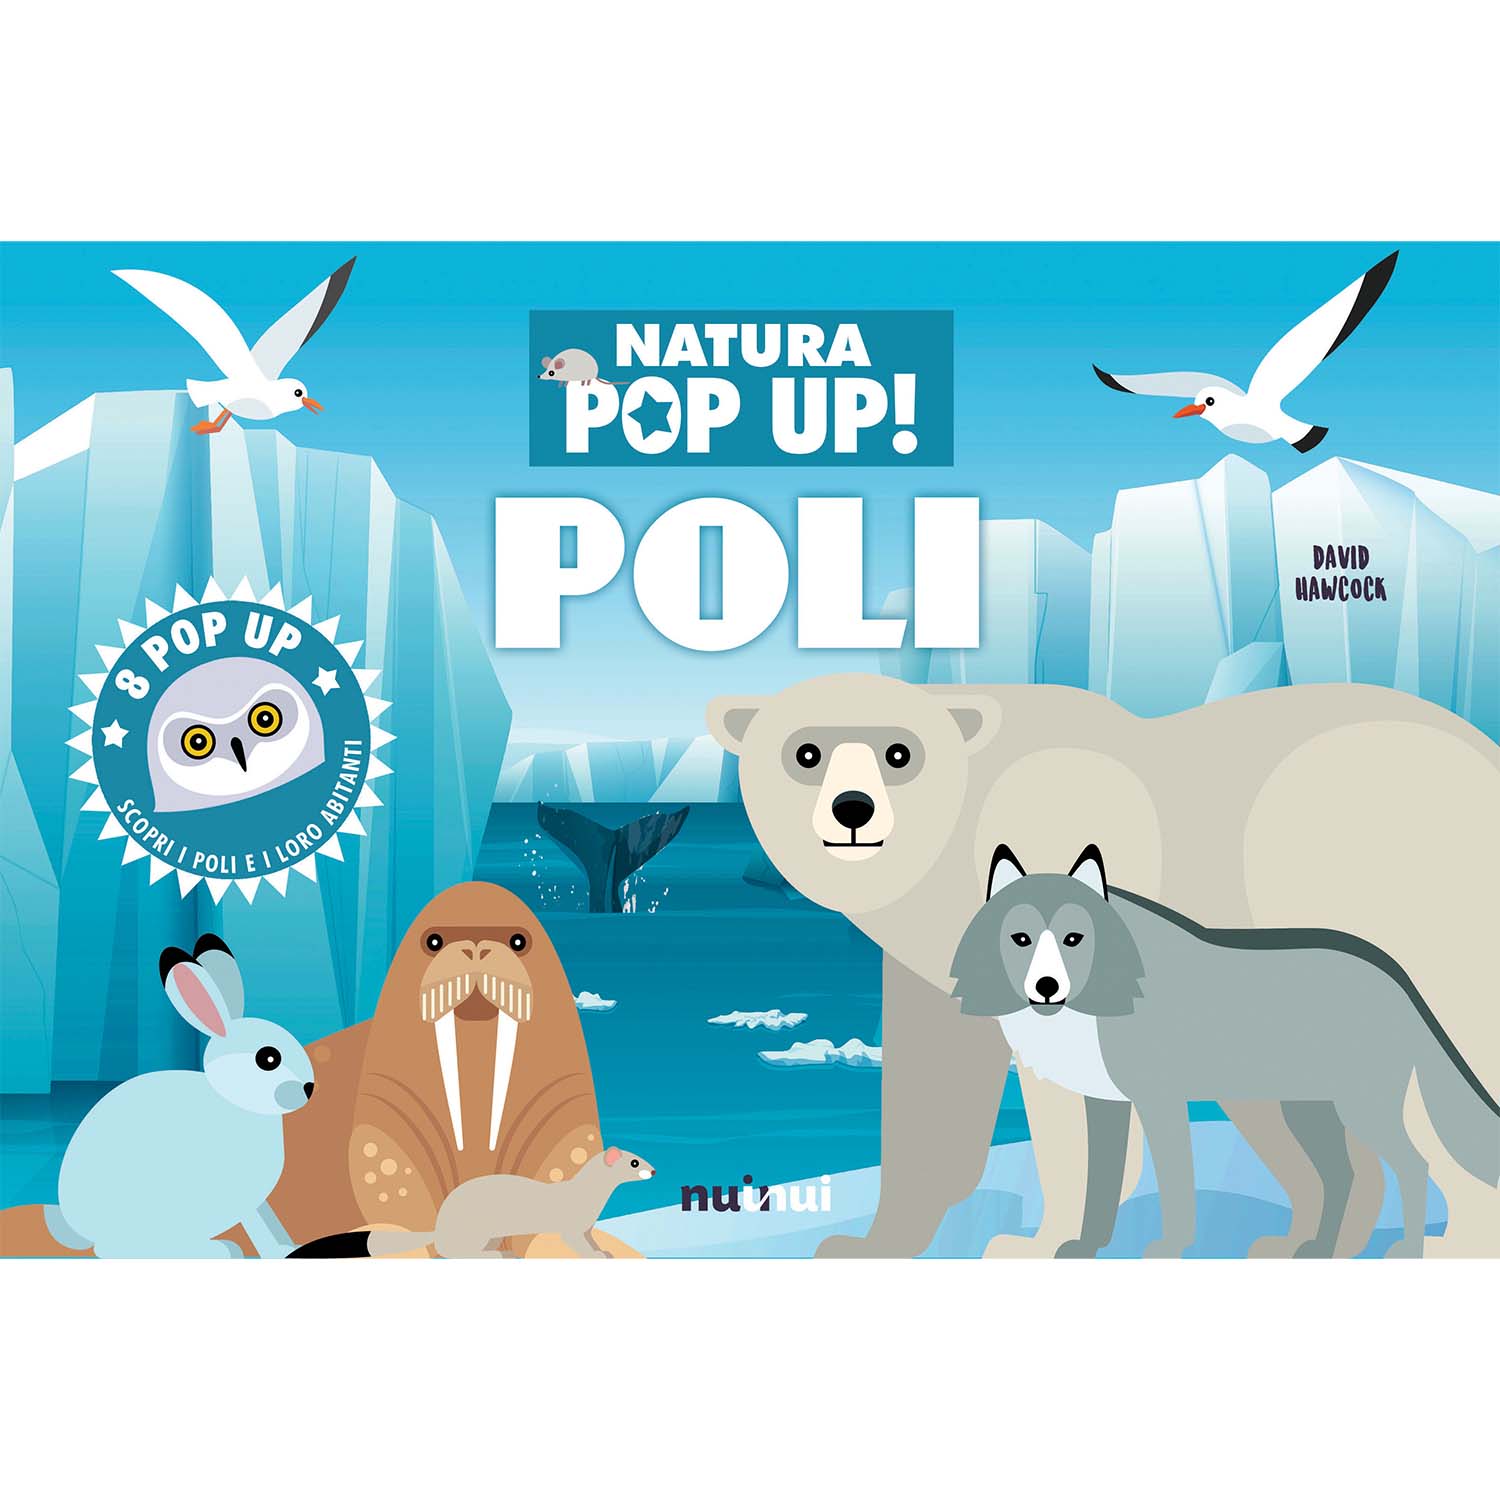 Nature in pop up - Poli